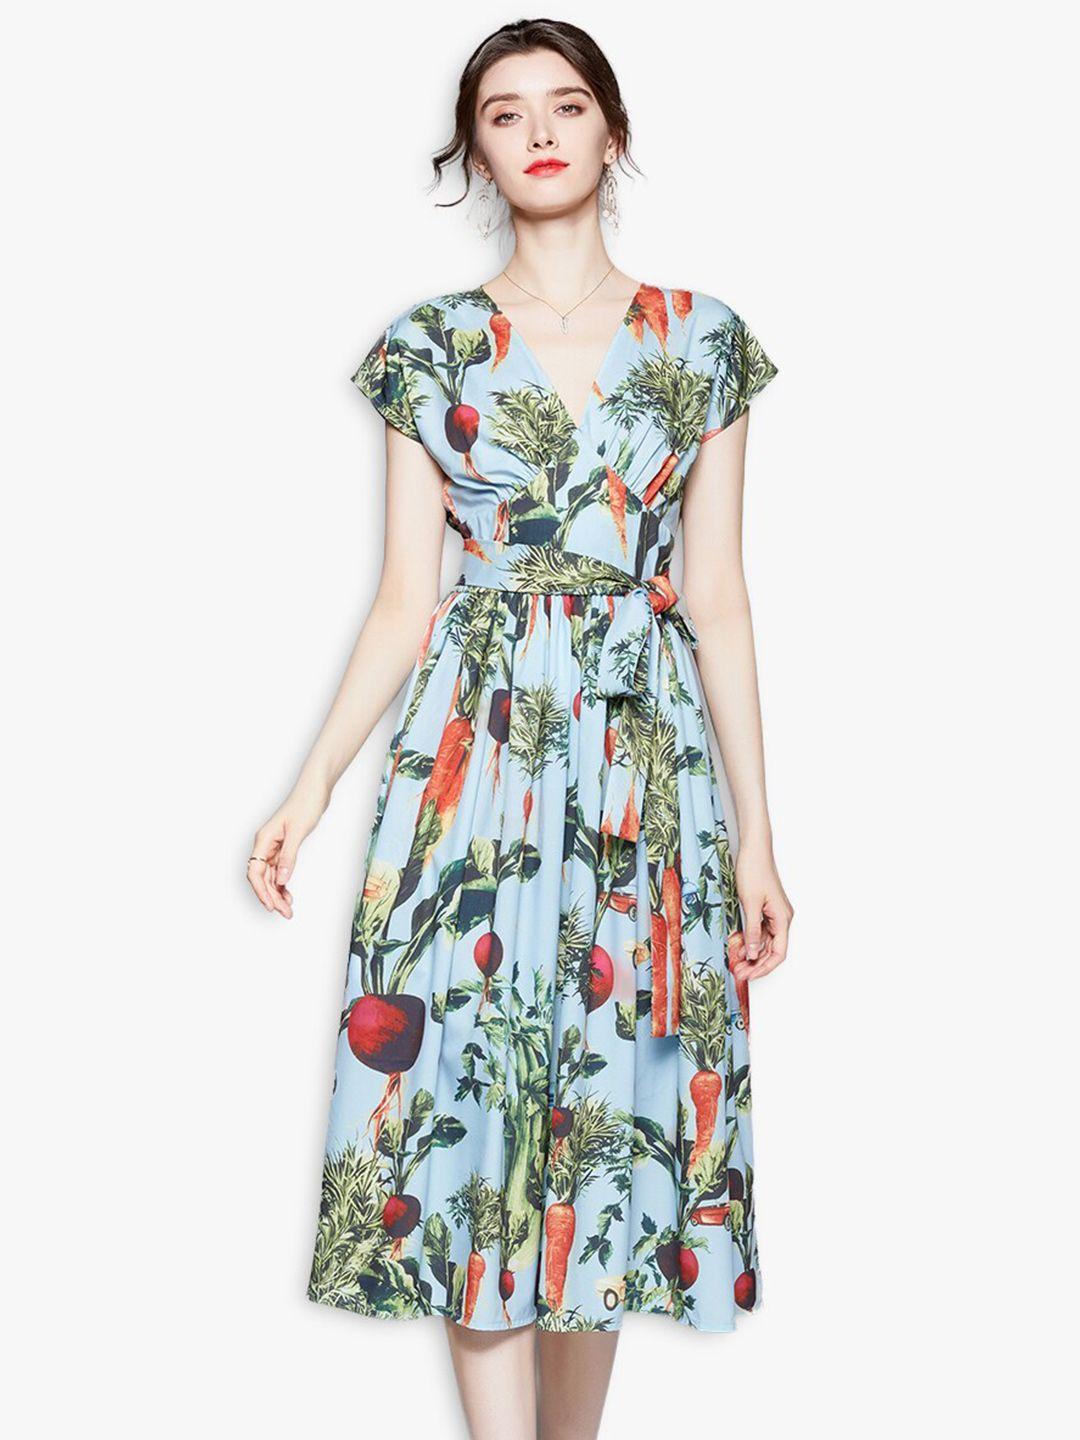 jc collection blue & green floral dress